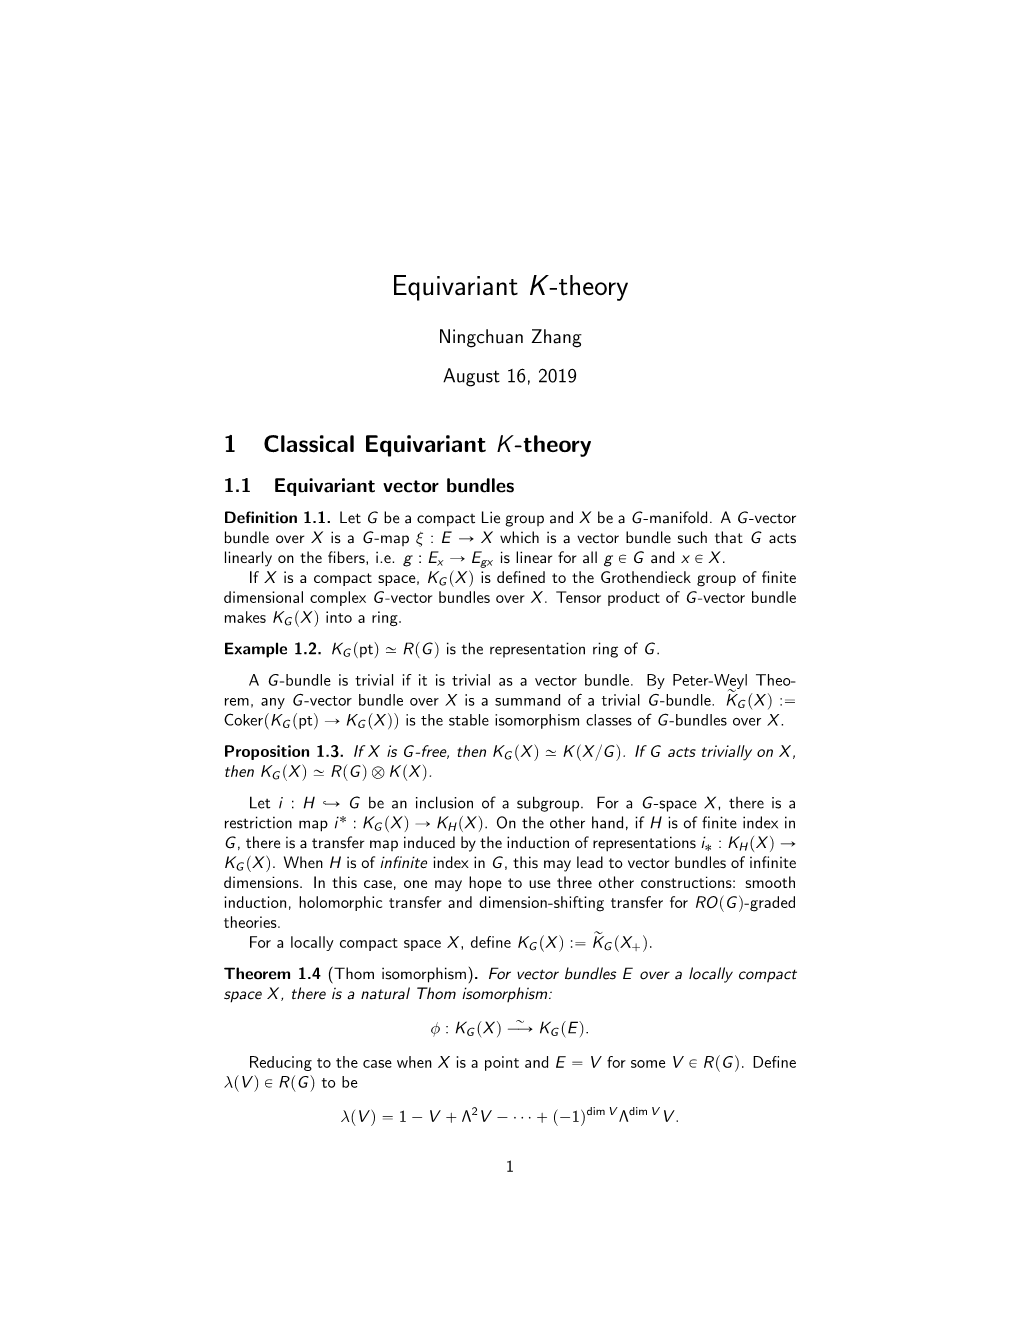 1 Classical Equivariant K-Theory 1.1 Equivariant Vector Bundles Deﬁnition 1.1